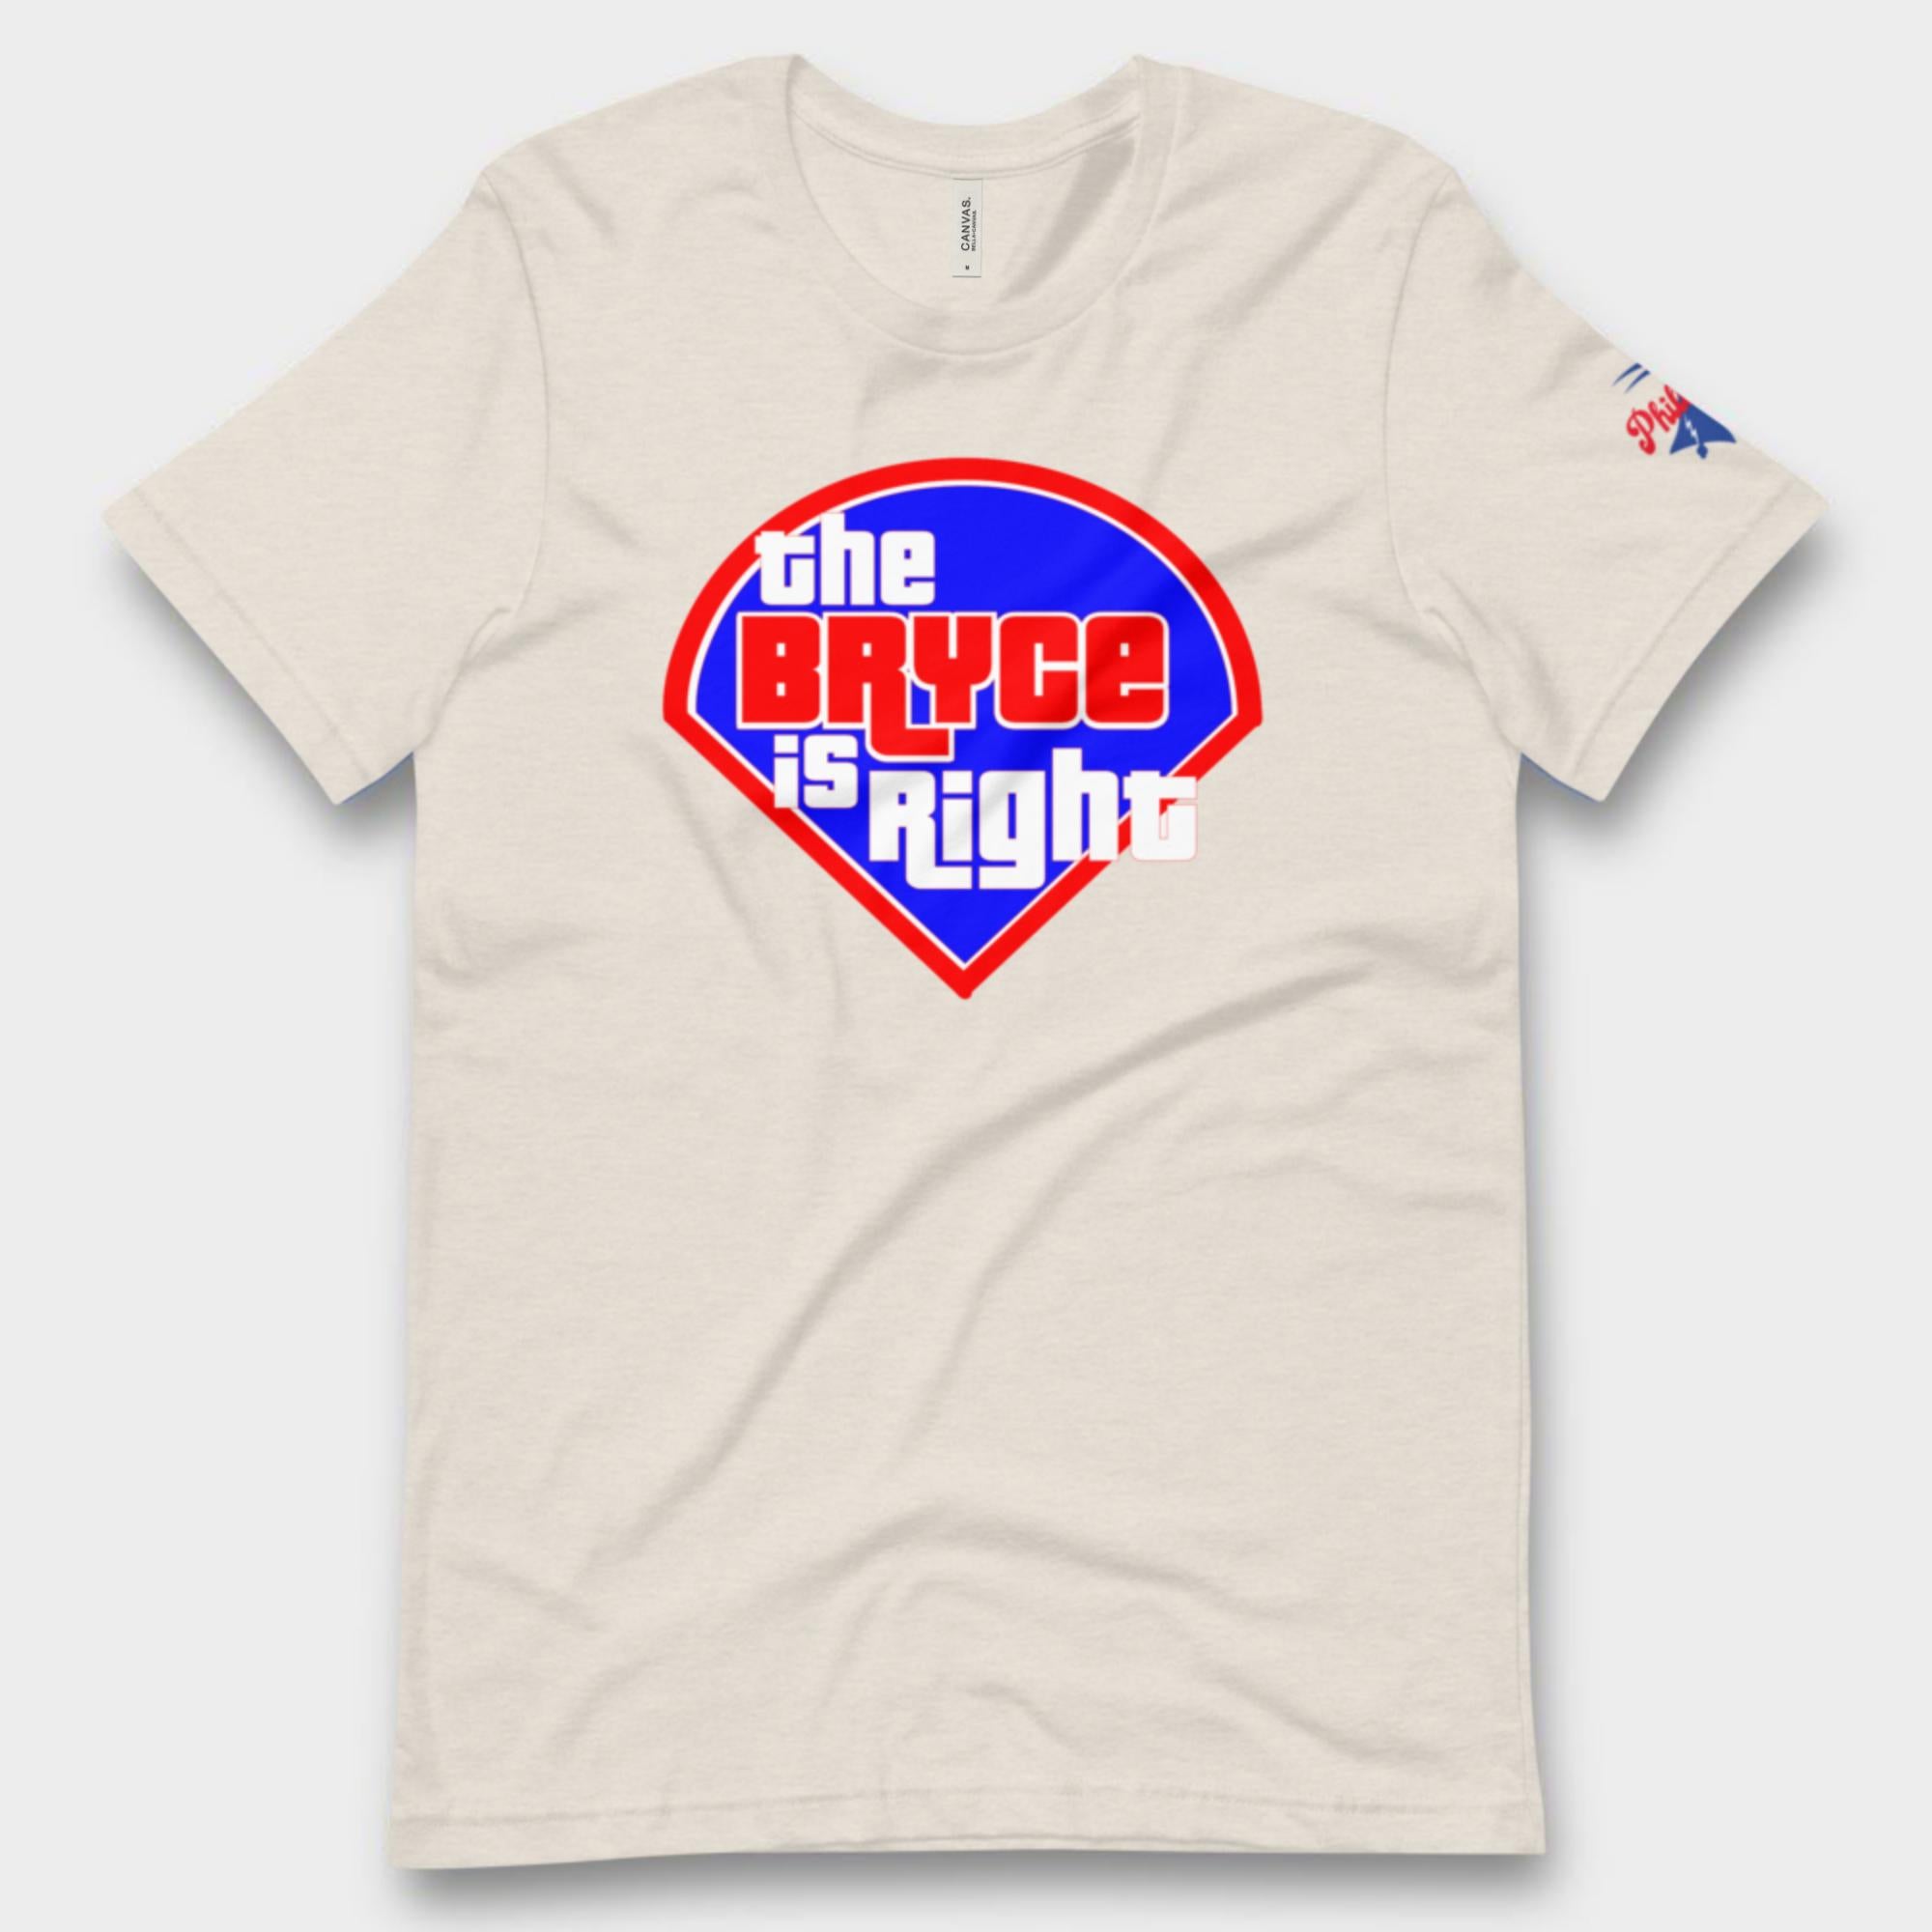 "The Bryce Is Right" Tee